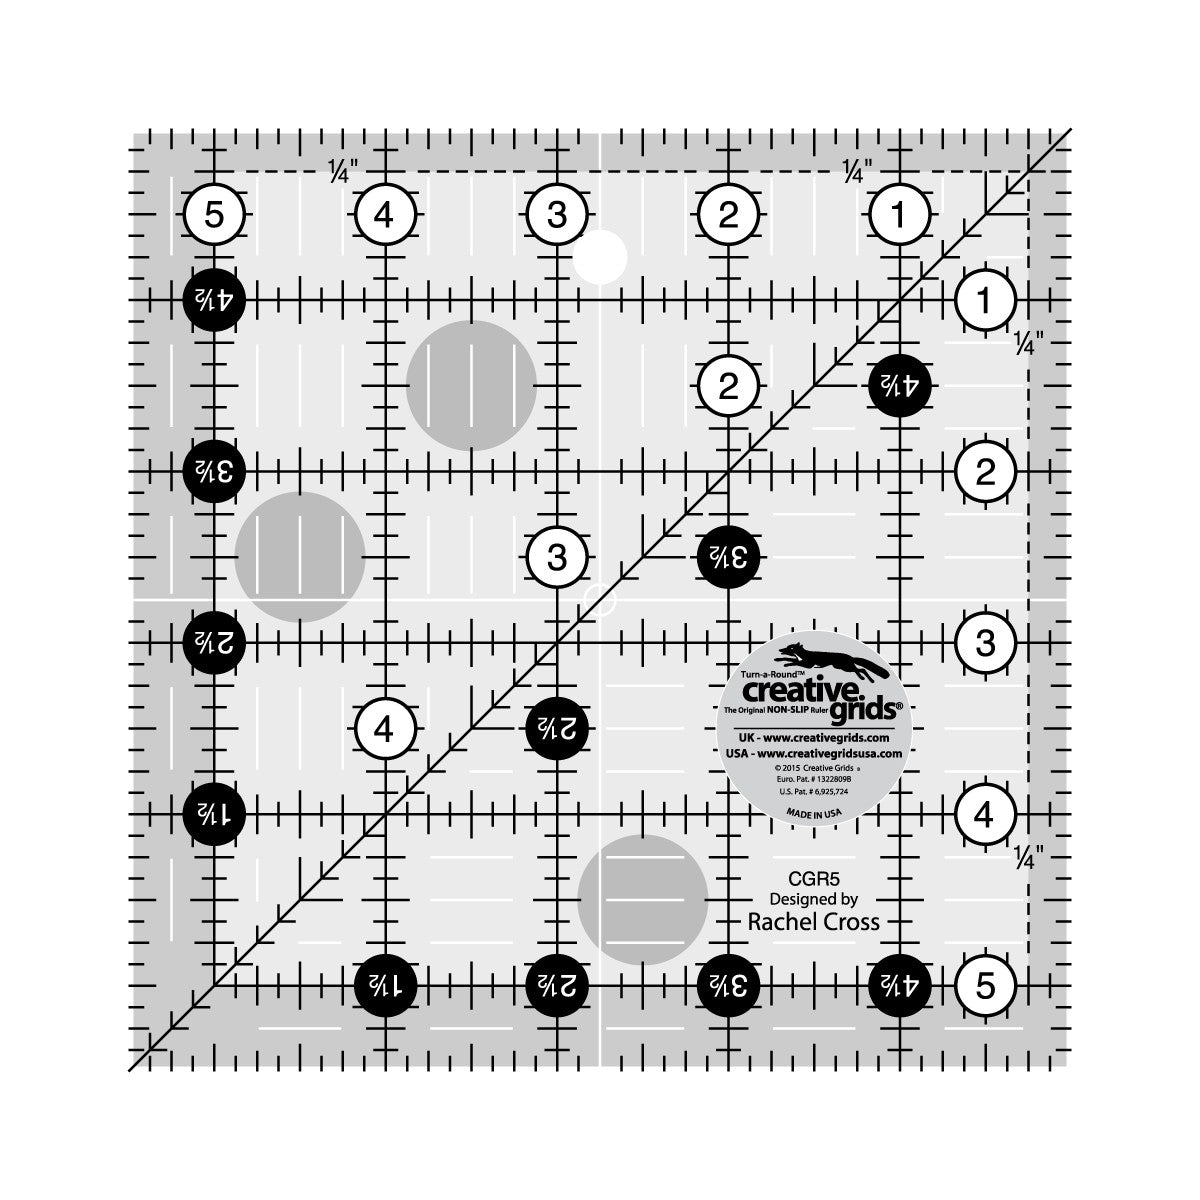 Creative Grids 5-1/2-Inch Square Quilt Ruler (CGR5)